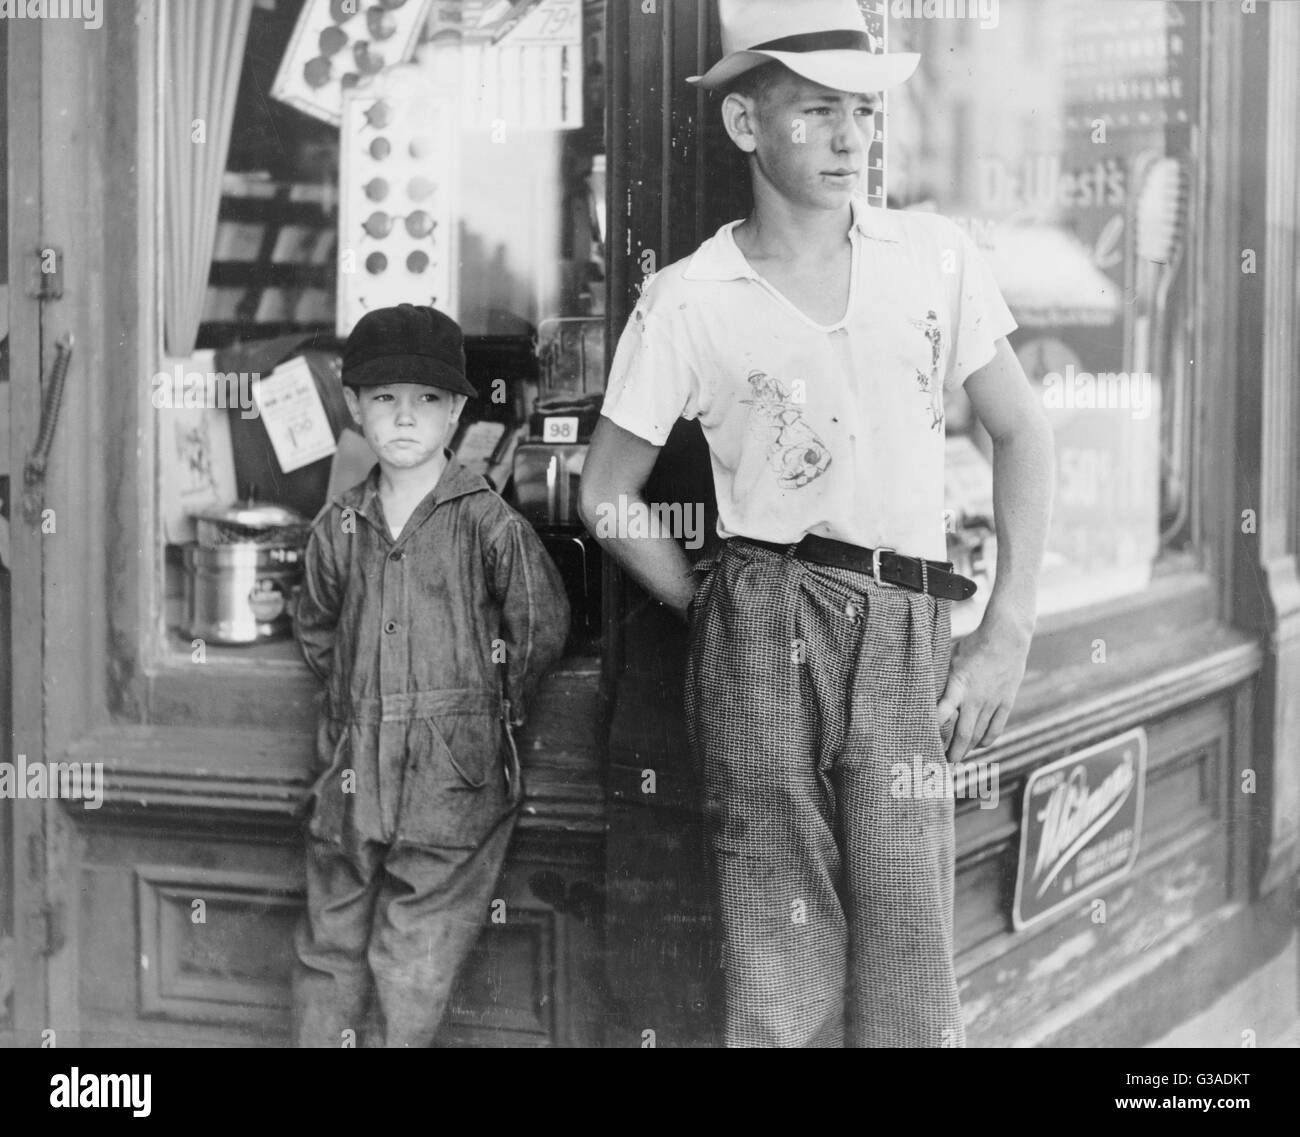 Boys in front of drugstore. Dover, Delaware. Date 1938 July. Stock Photo